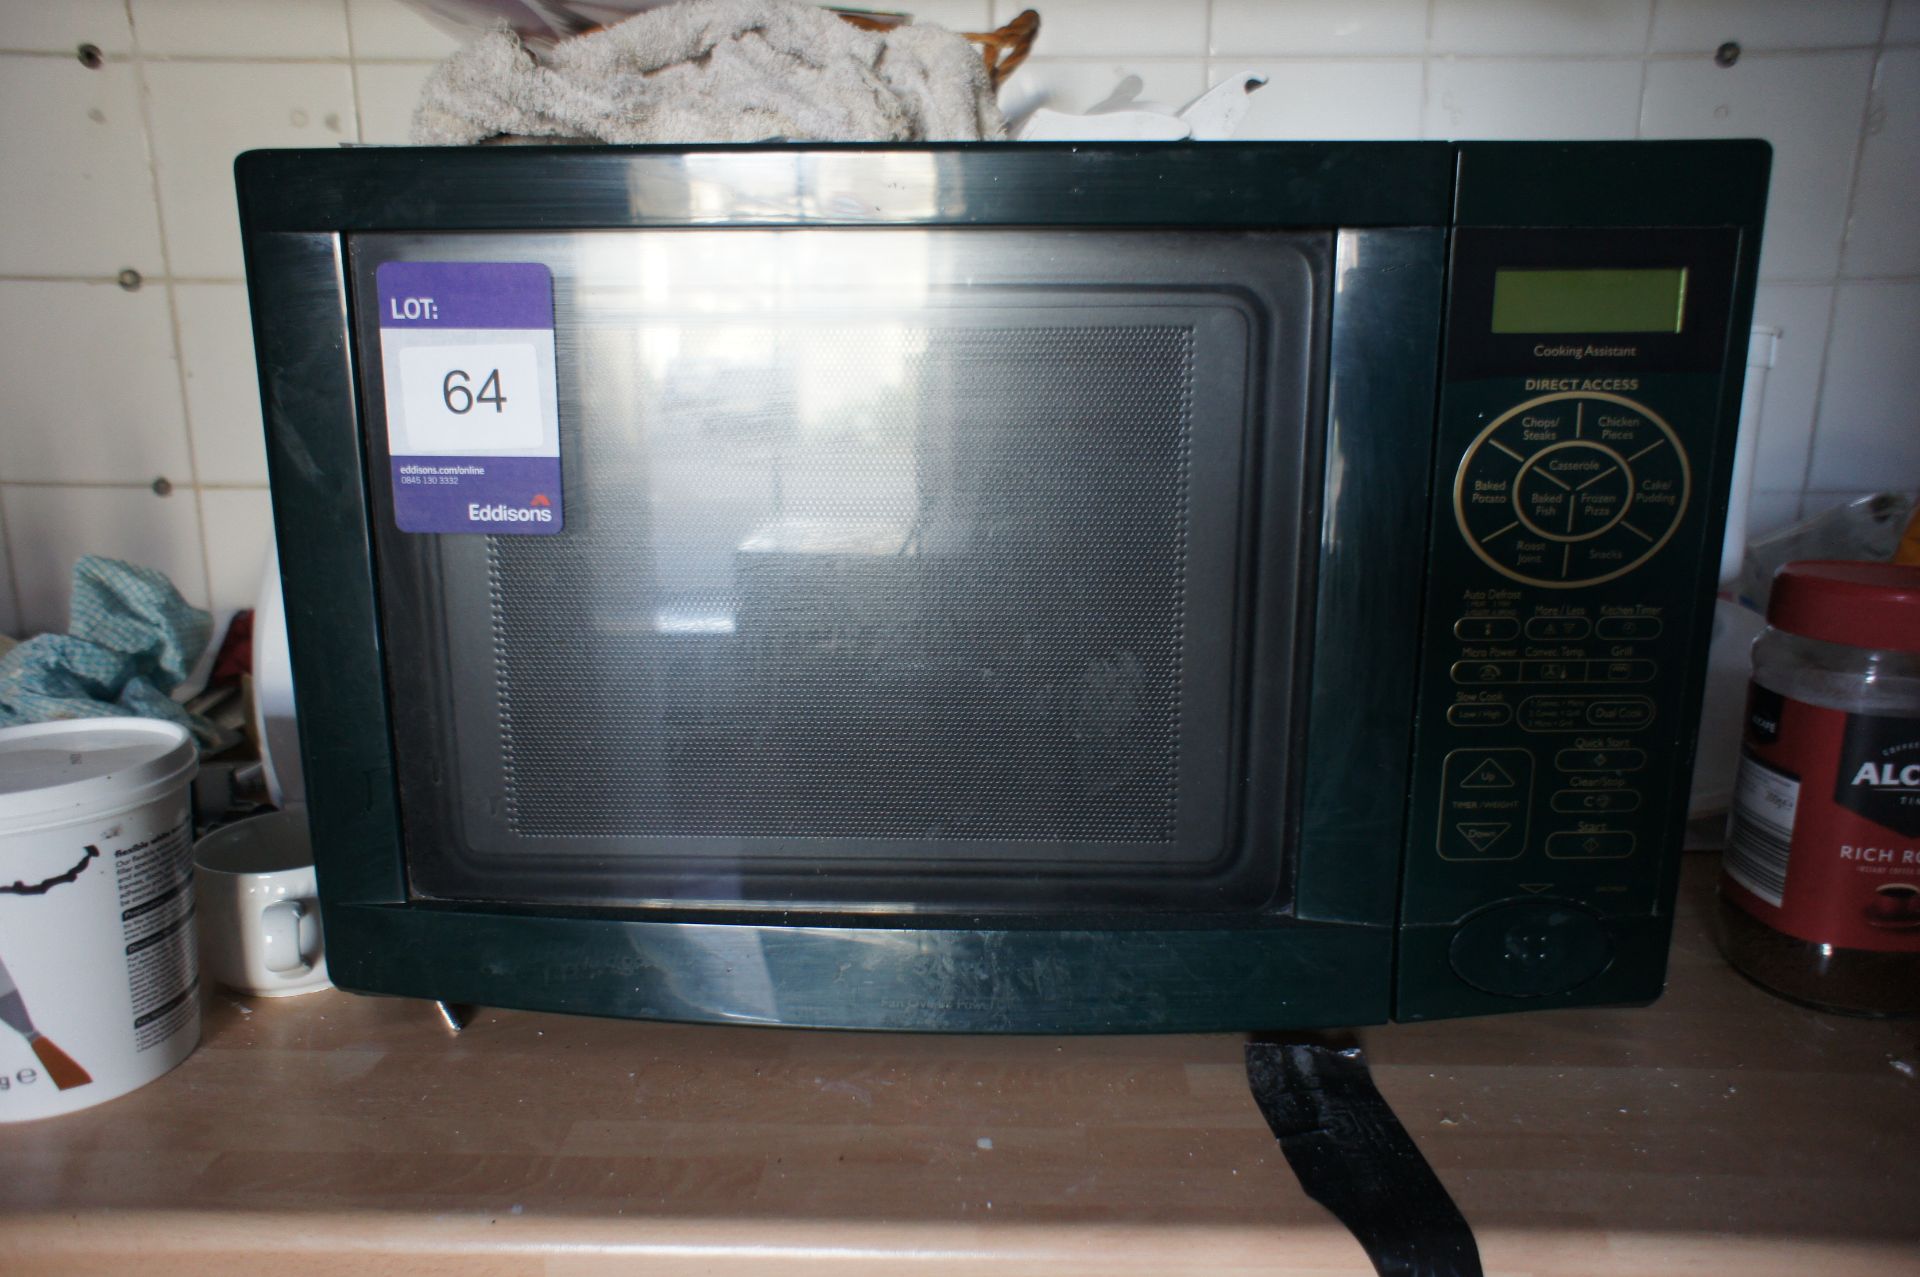 Sanyo EM-D9550 cooking assistant - Image 2 of 3